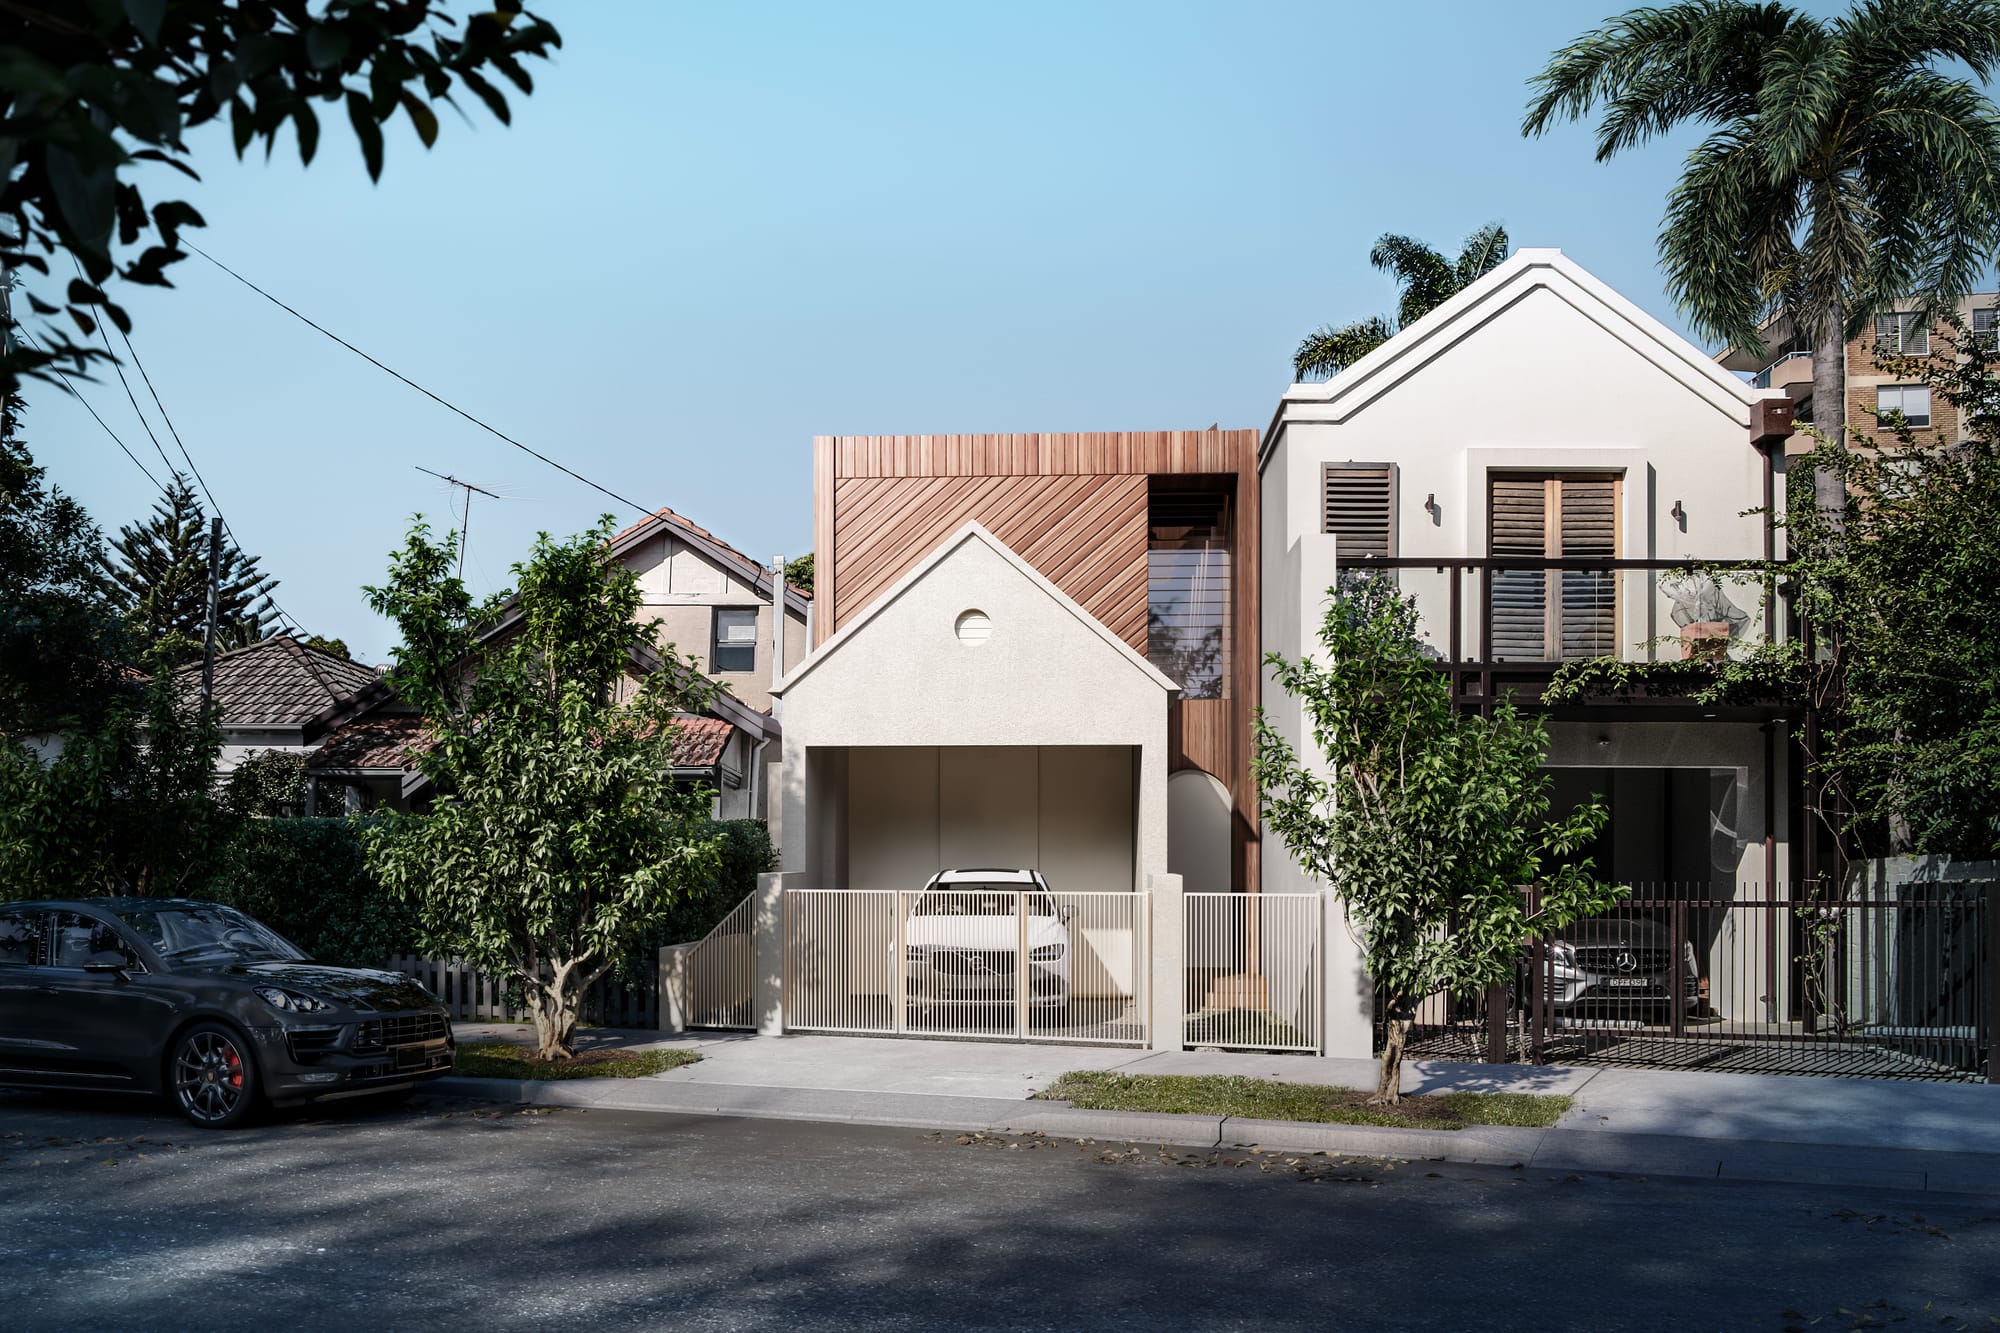 Riddell Street by Studio Shand. Imagery by Lara Clemente. Street facade of double-storey home. Upper storey clad in timber. Pitched roof on ground floor above exposed carport. 